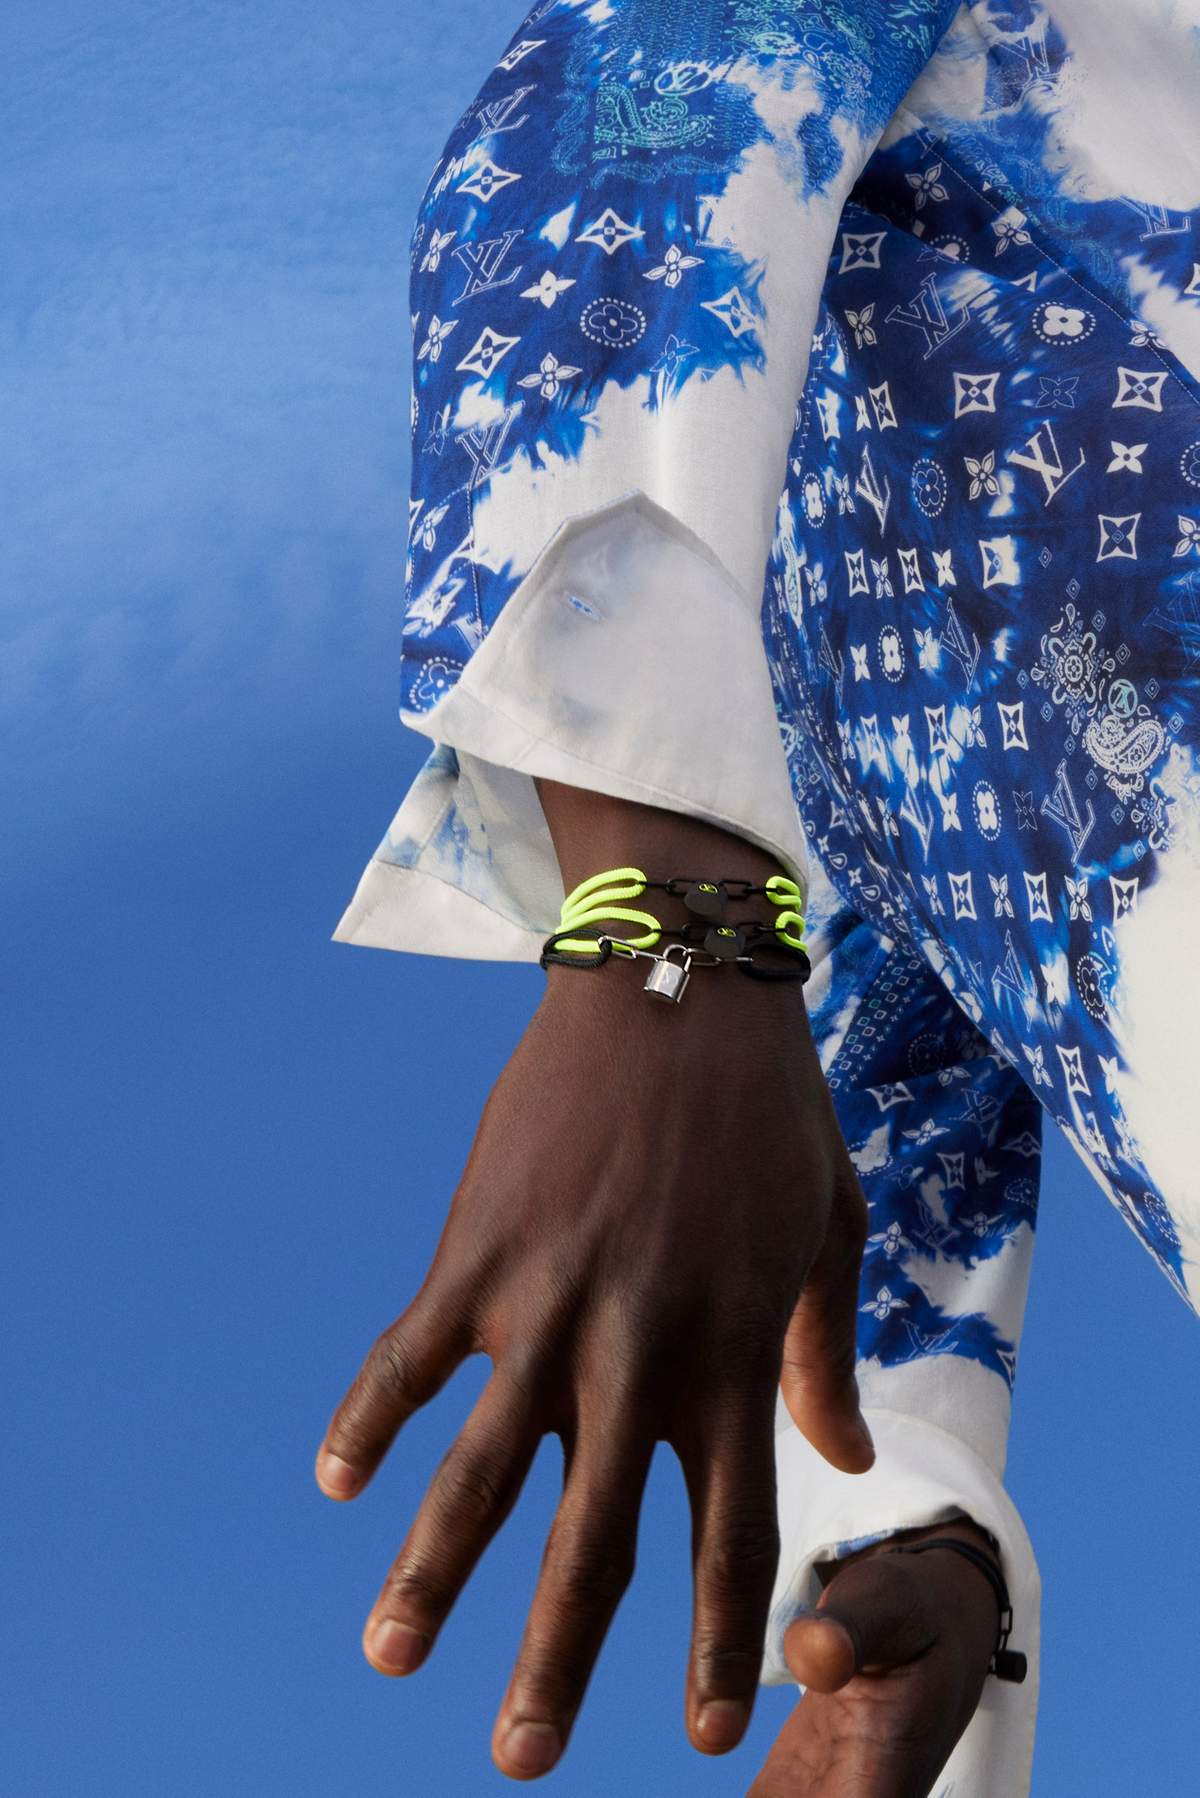 Designed by Virgil Abloh, Louis Vuitton has unveiled new silver lockit  bracelets for UNICEF - Luxurylaunches